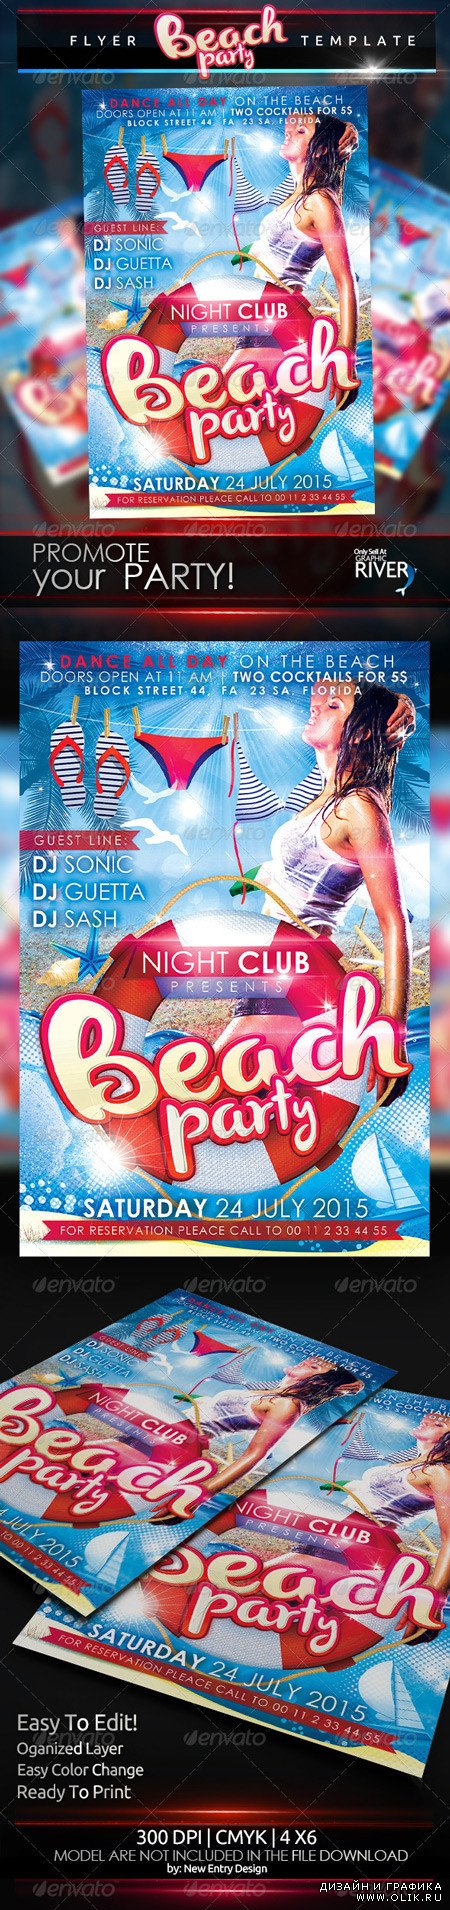 Beach Party Flyer Template 5100872